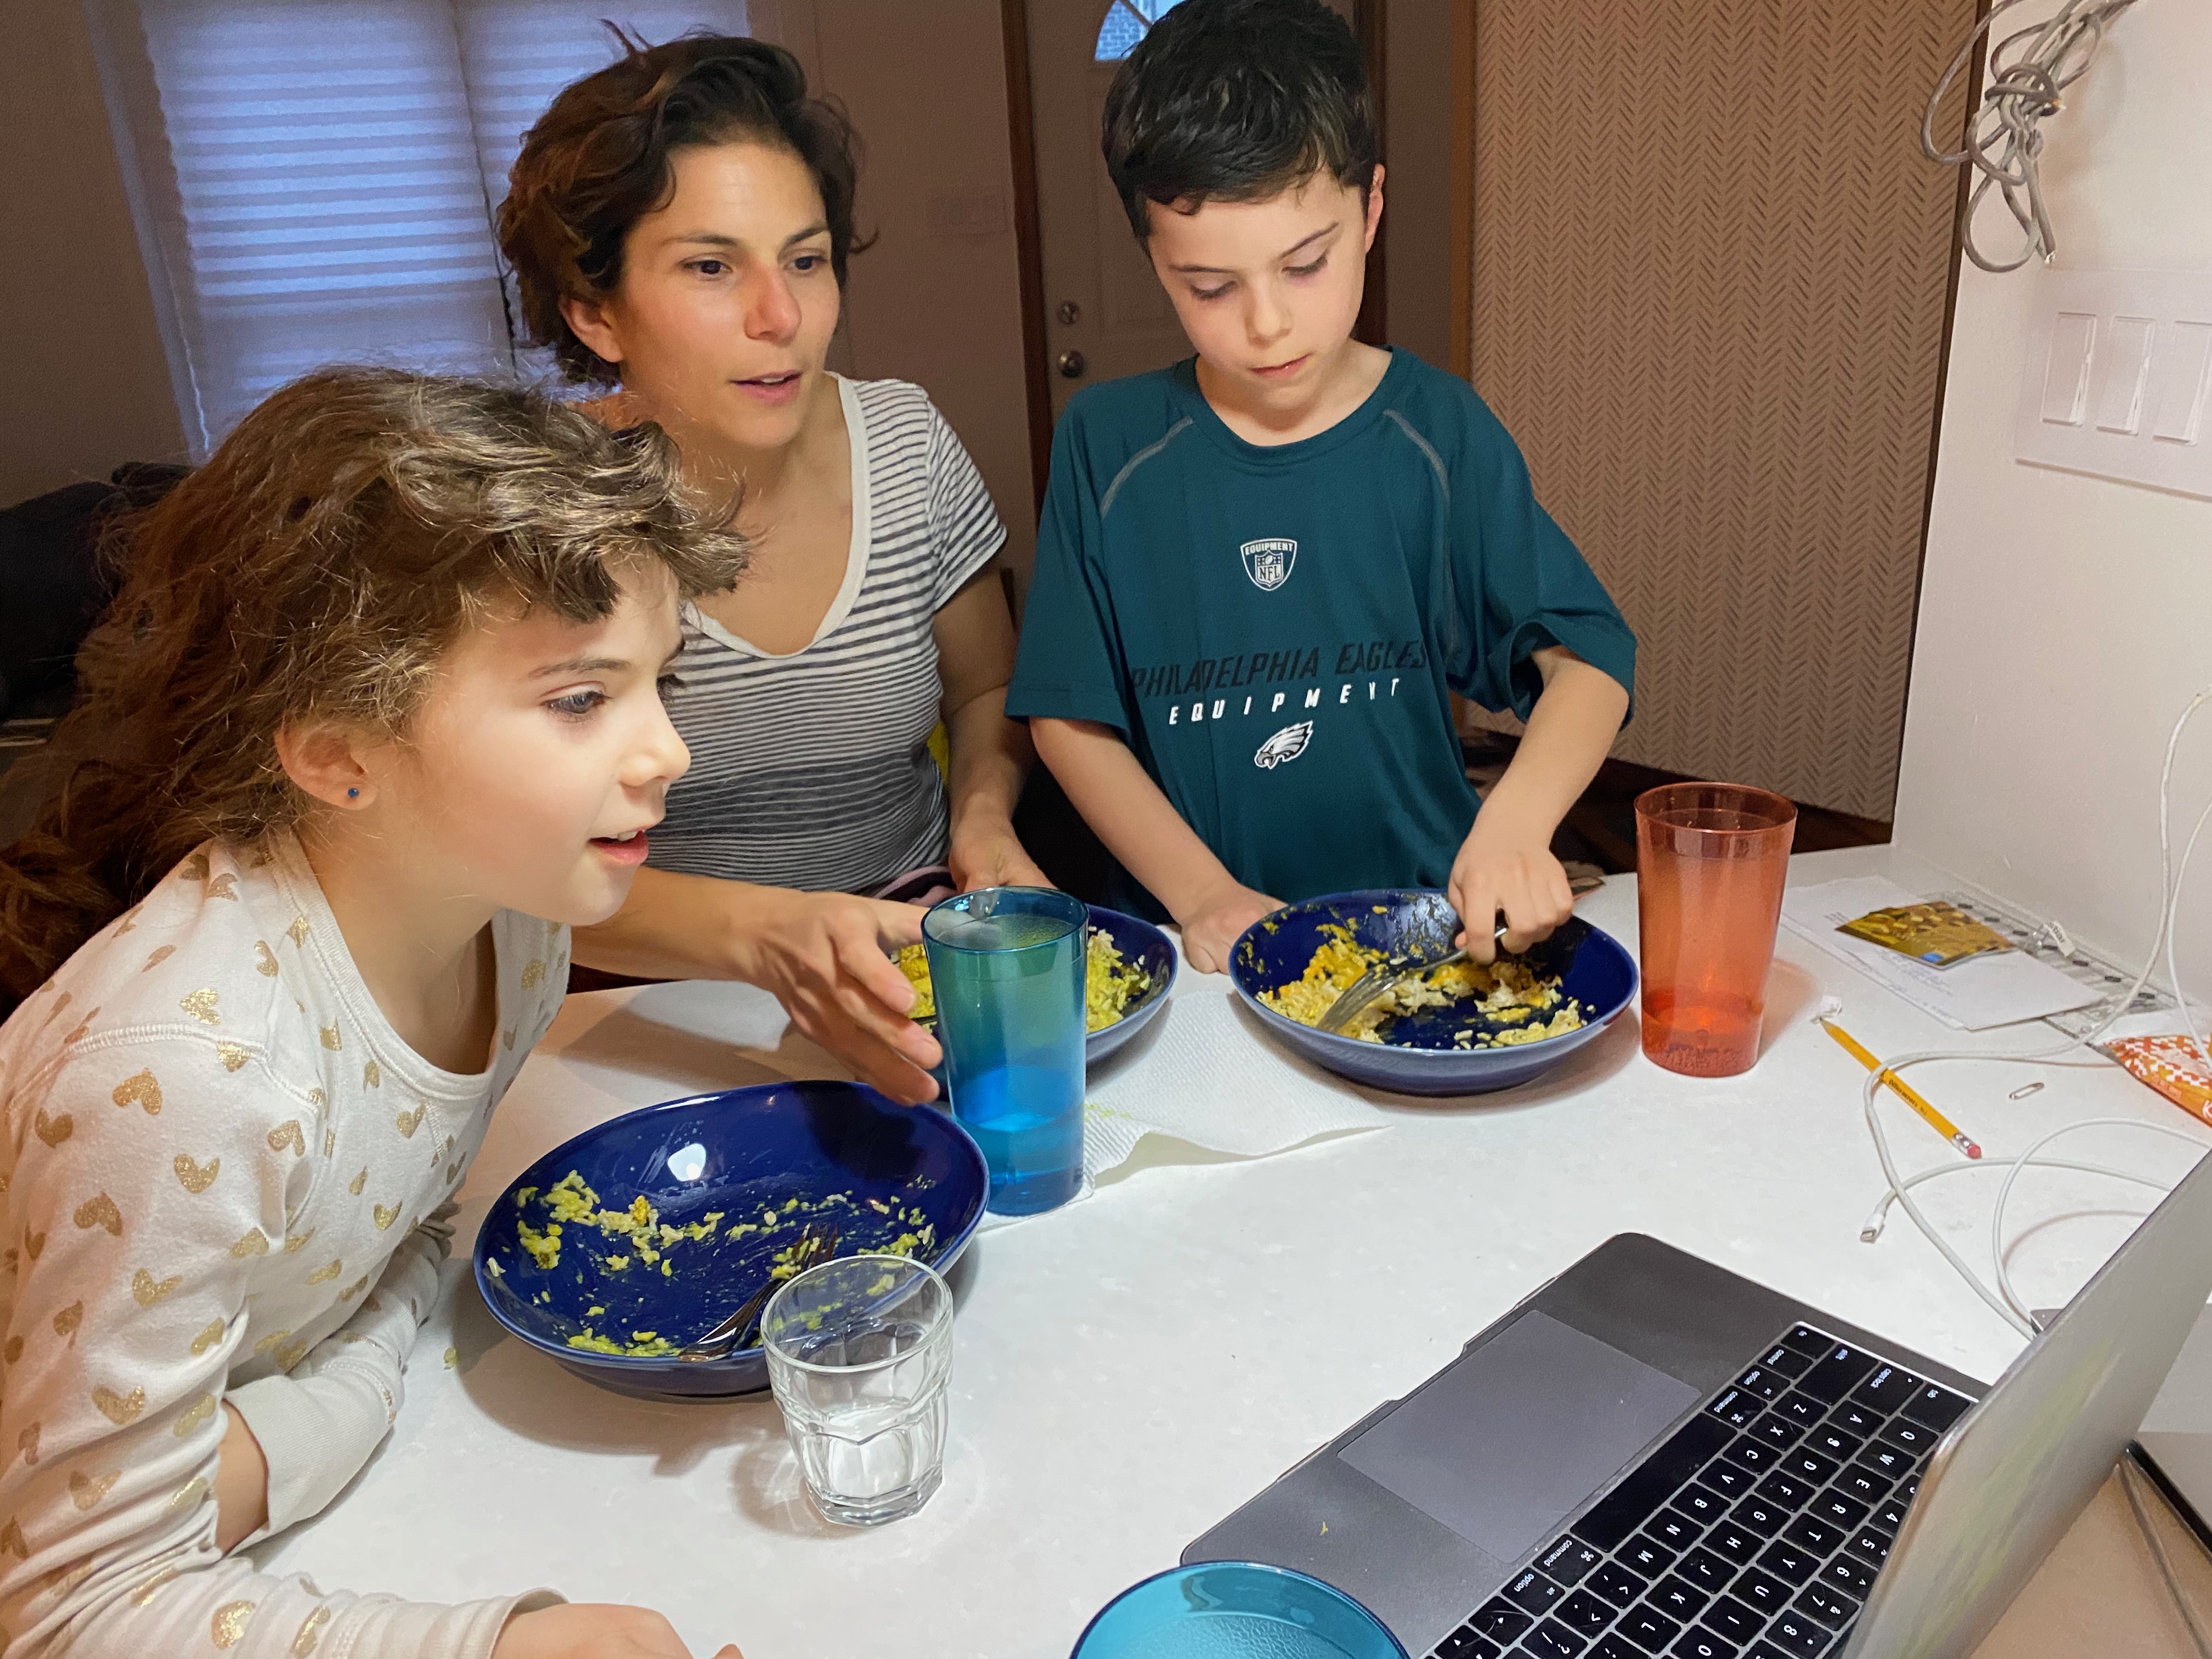 A professor and two children eating from bowls at a kitchen counter with a laptop computer open in front of them. 